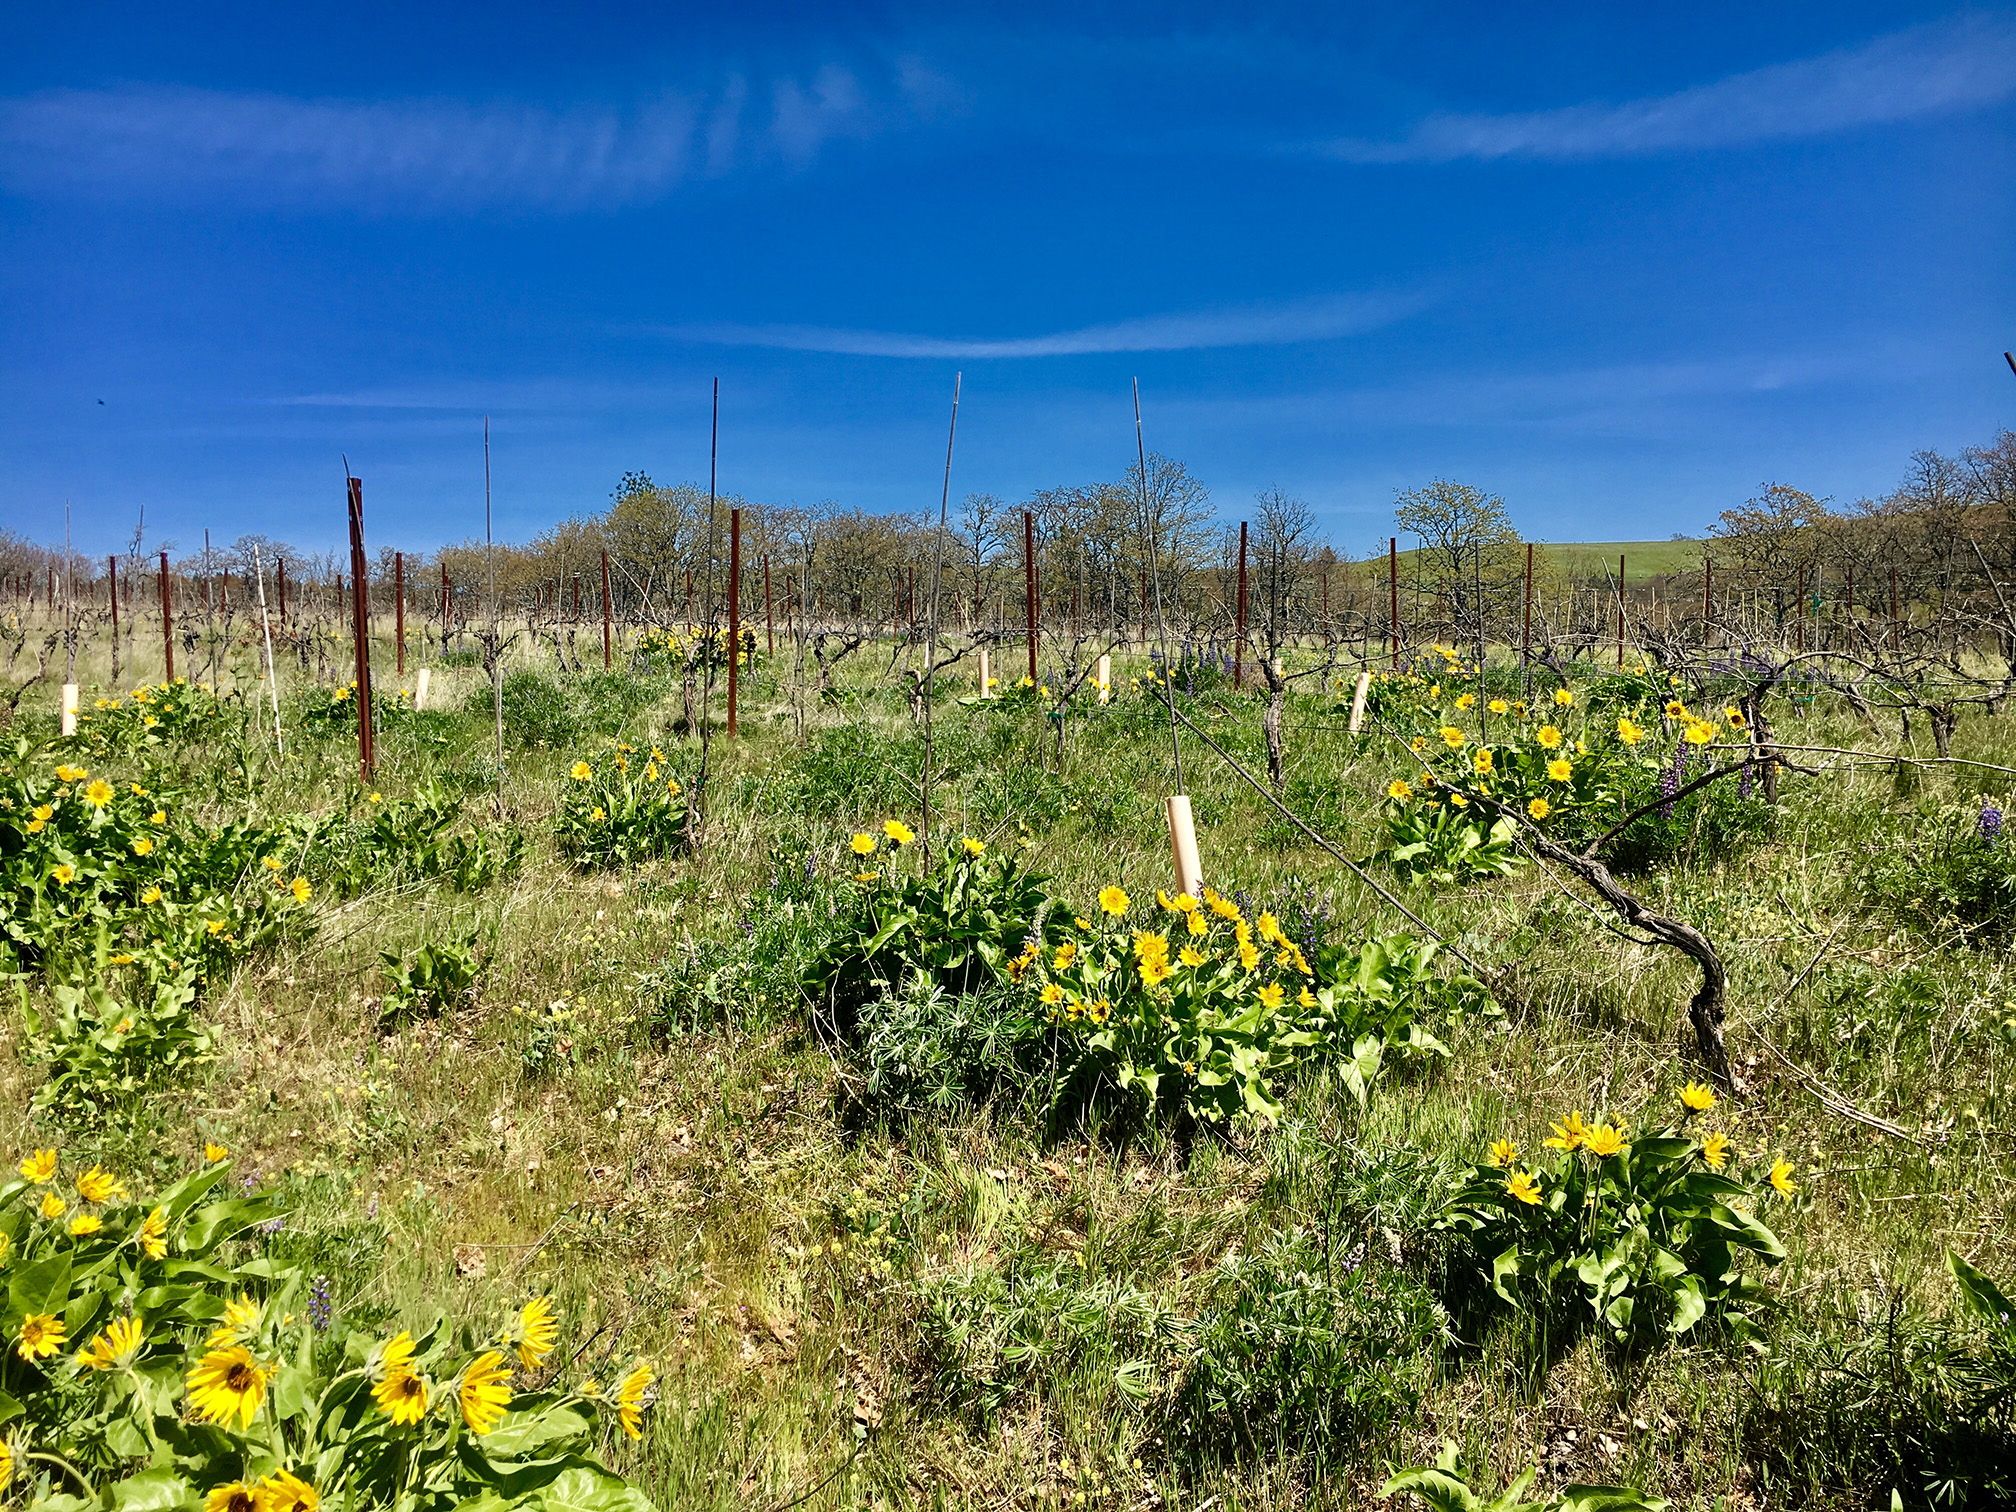 Under a clear blue sky, the bright yellow flowers of balsamroot show between the vines in this vineyard.